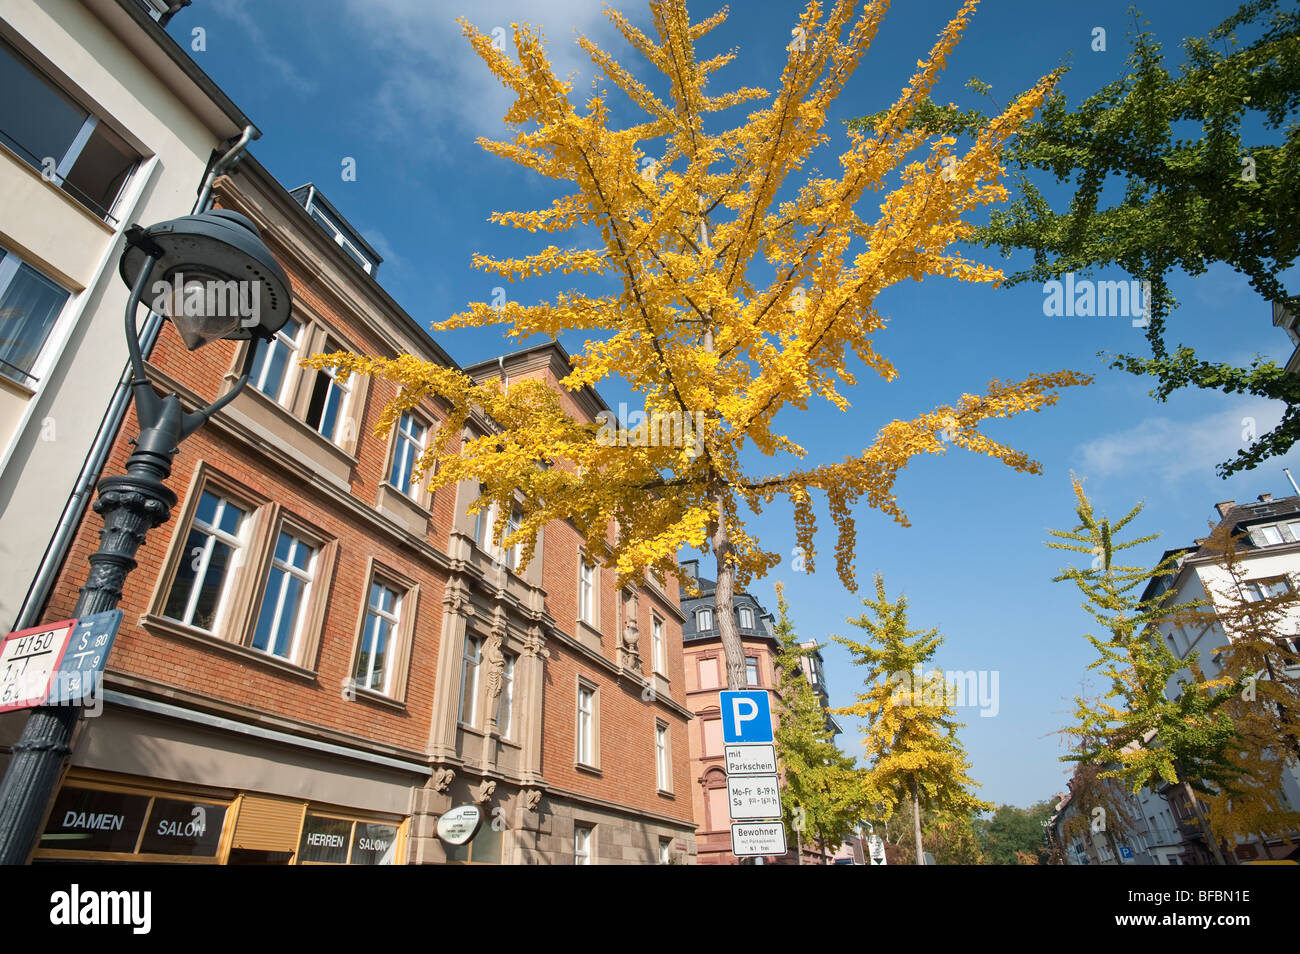 Autumn in Germany. Coloured leaves on the trees at a street crossing Stock Photo